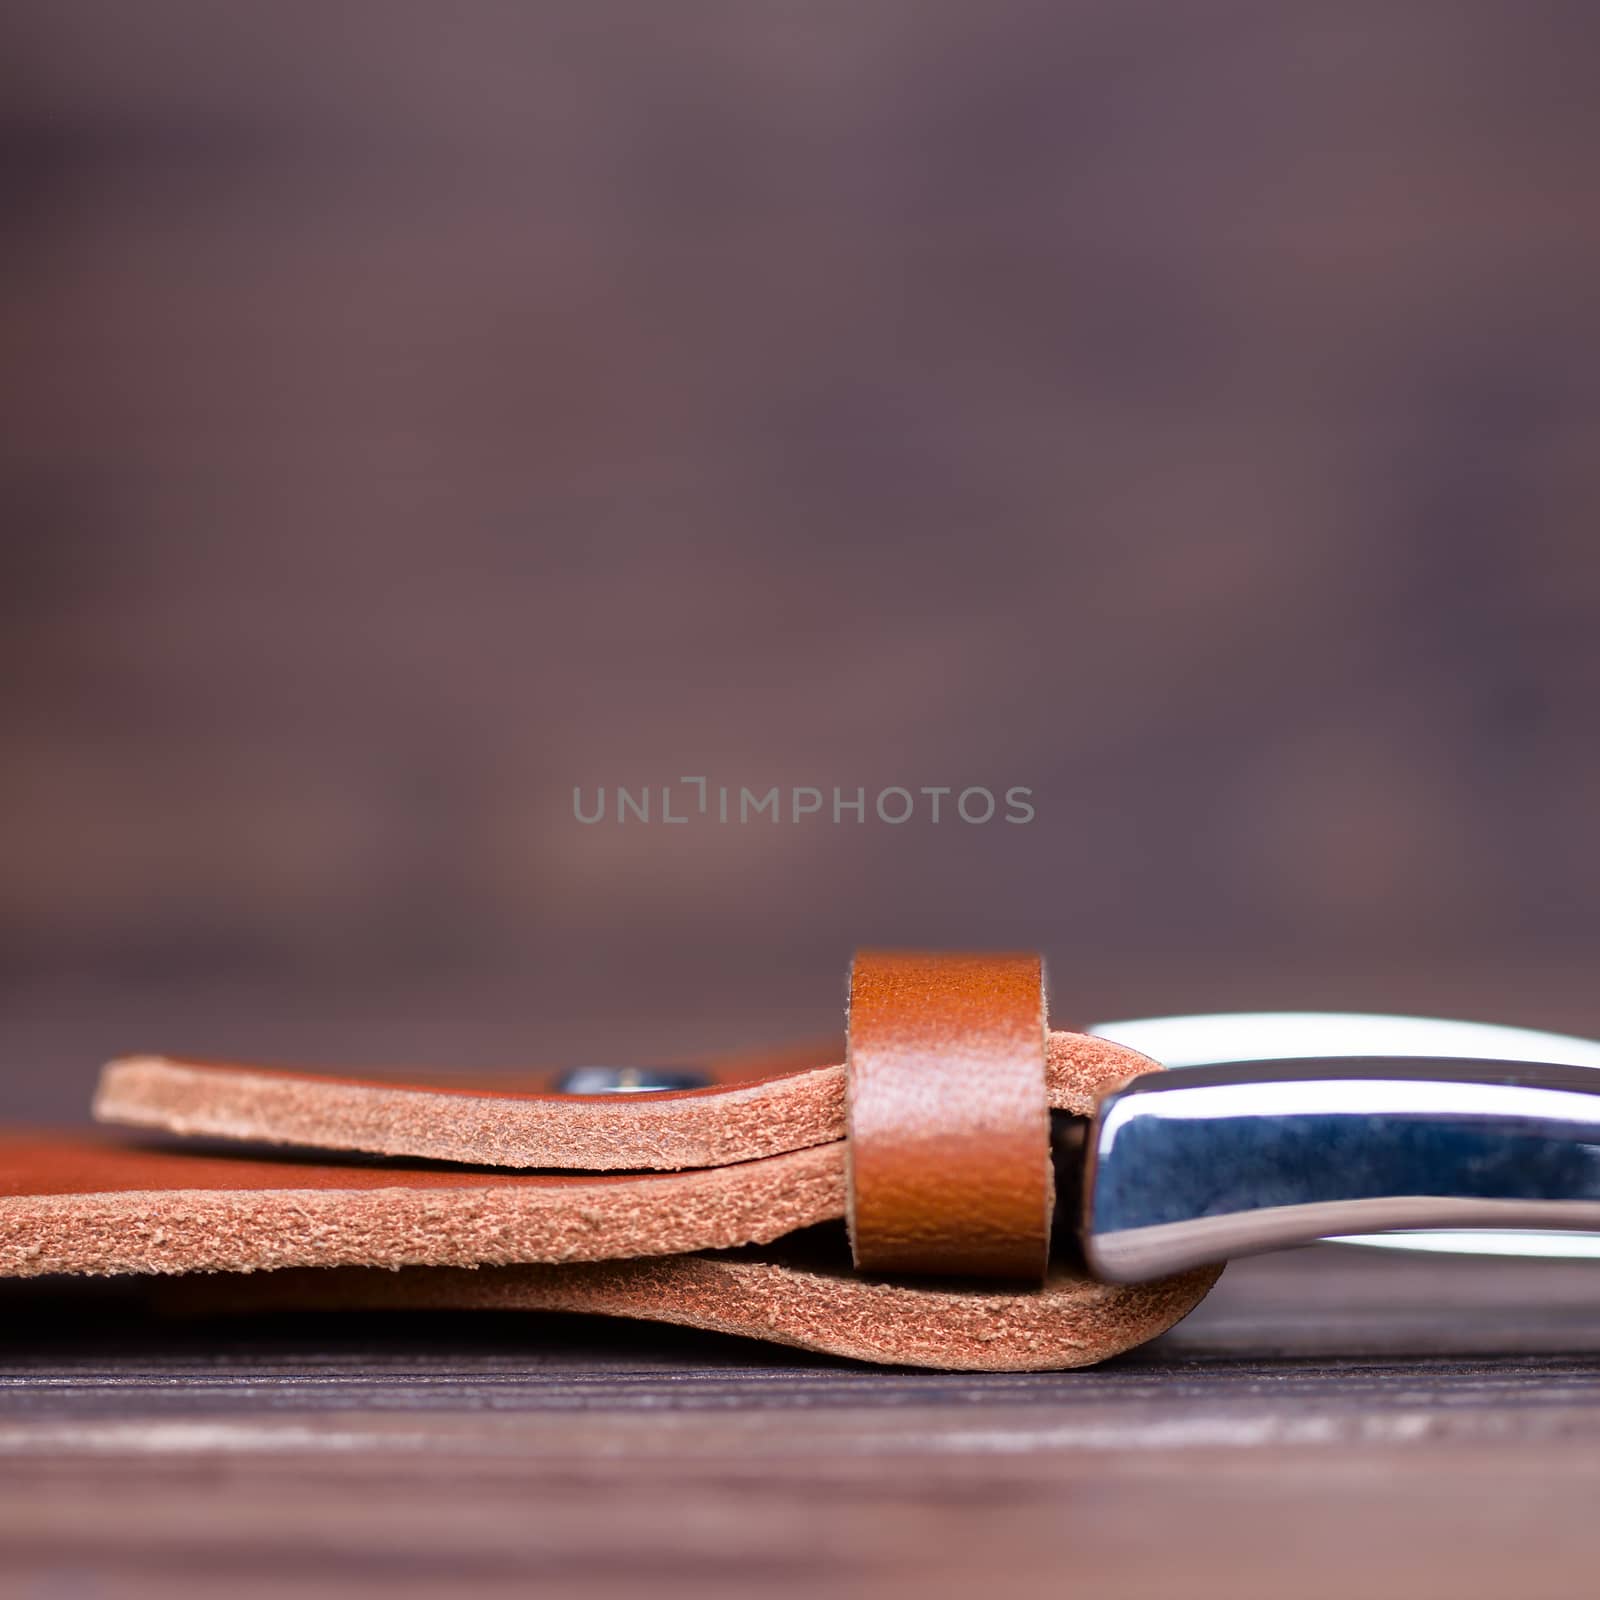 Ginger color handmade belt buckle lies on textured wooden background closeup. Side view. Stock photo of businessman accessories with blurred background.